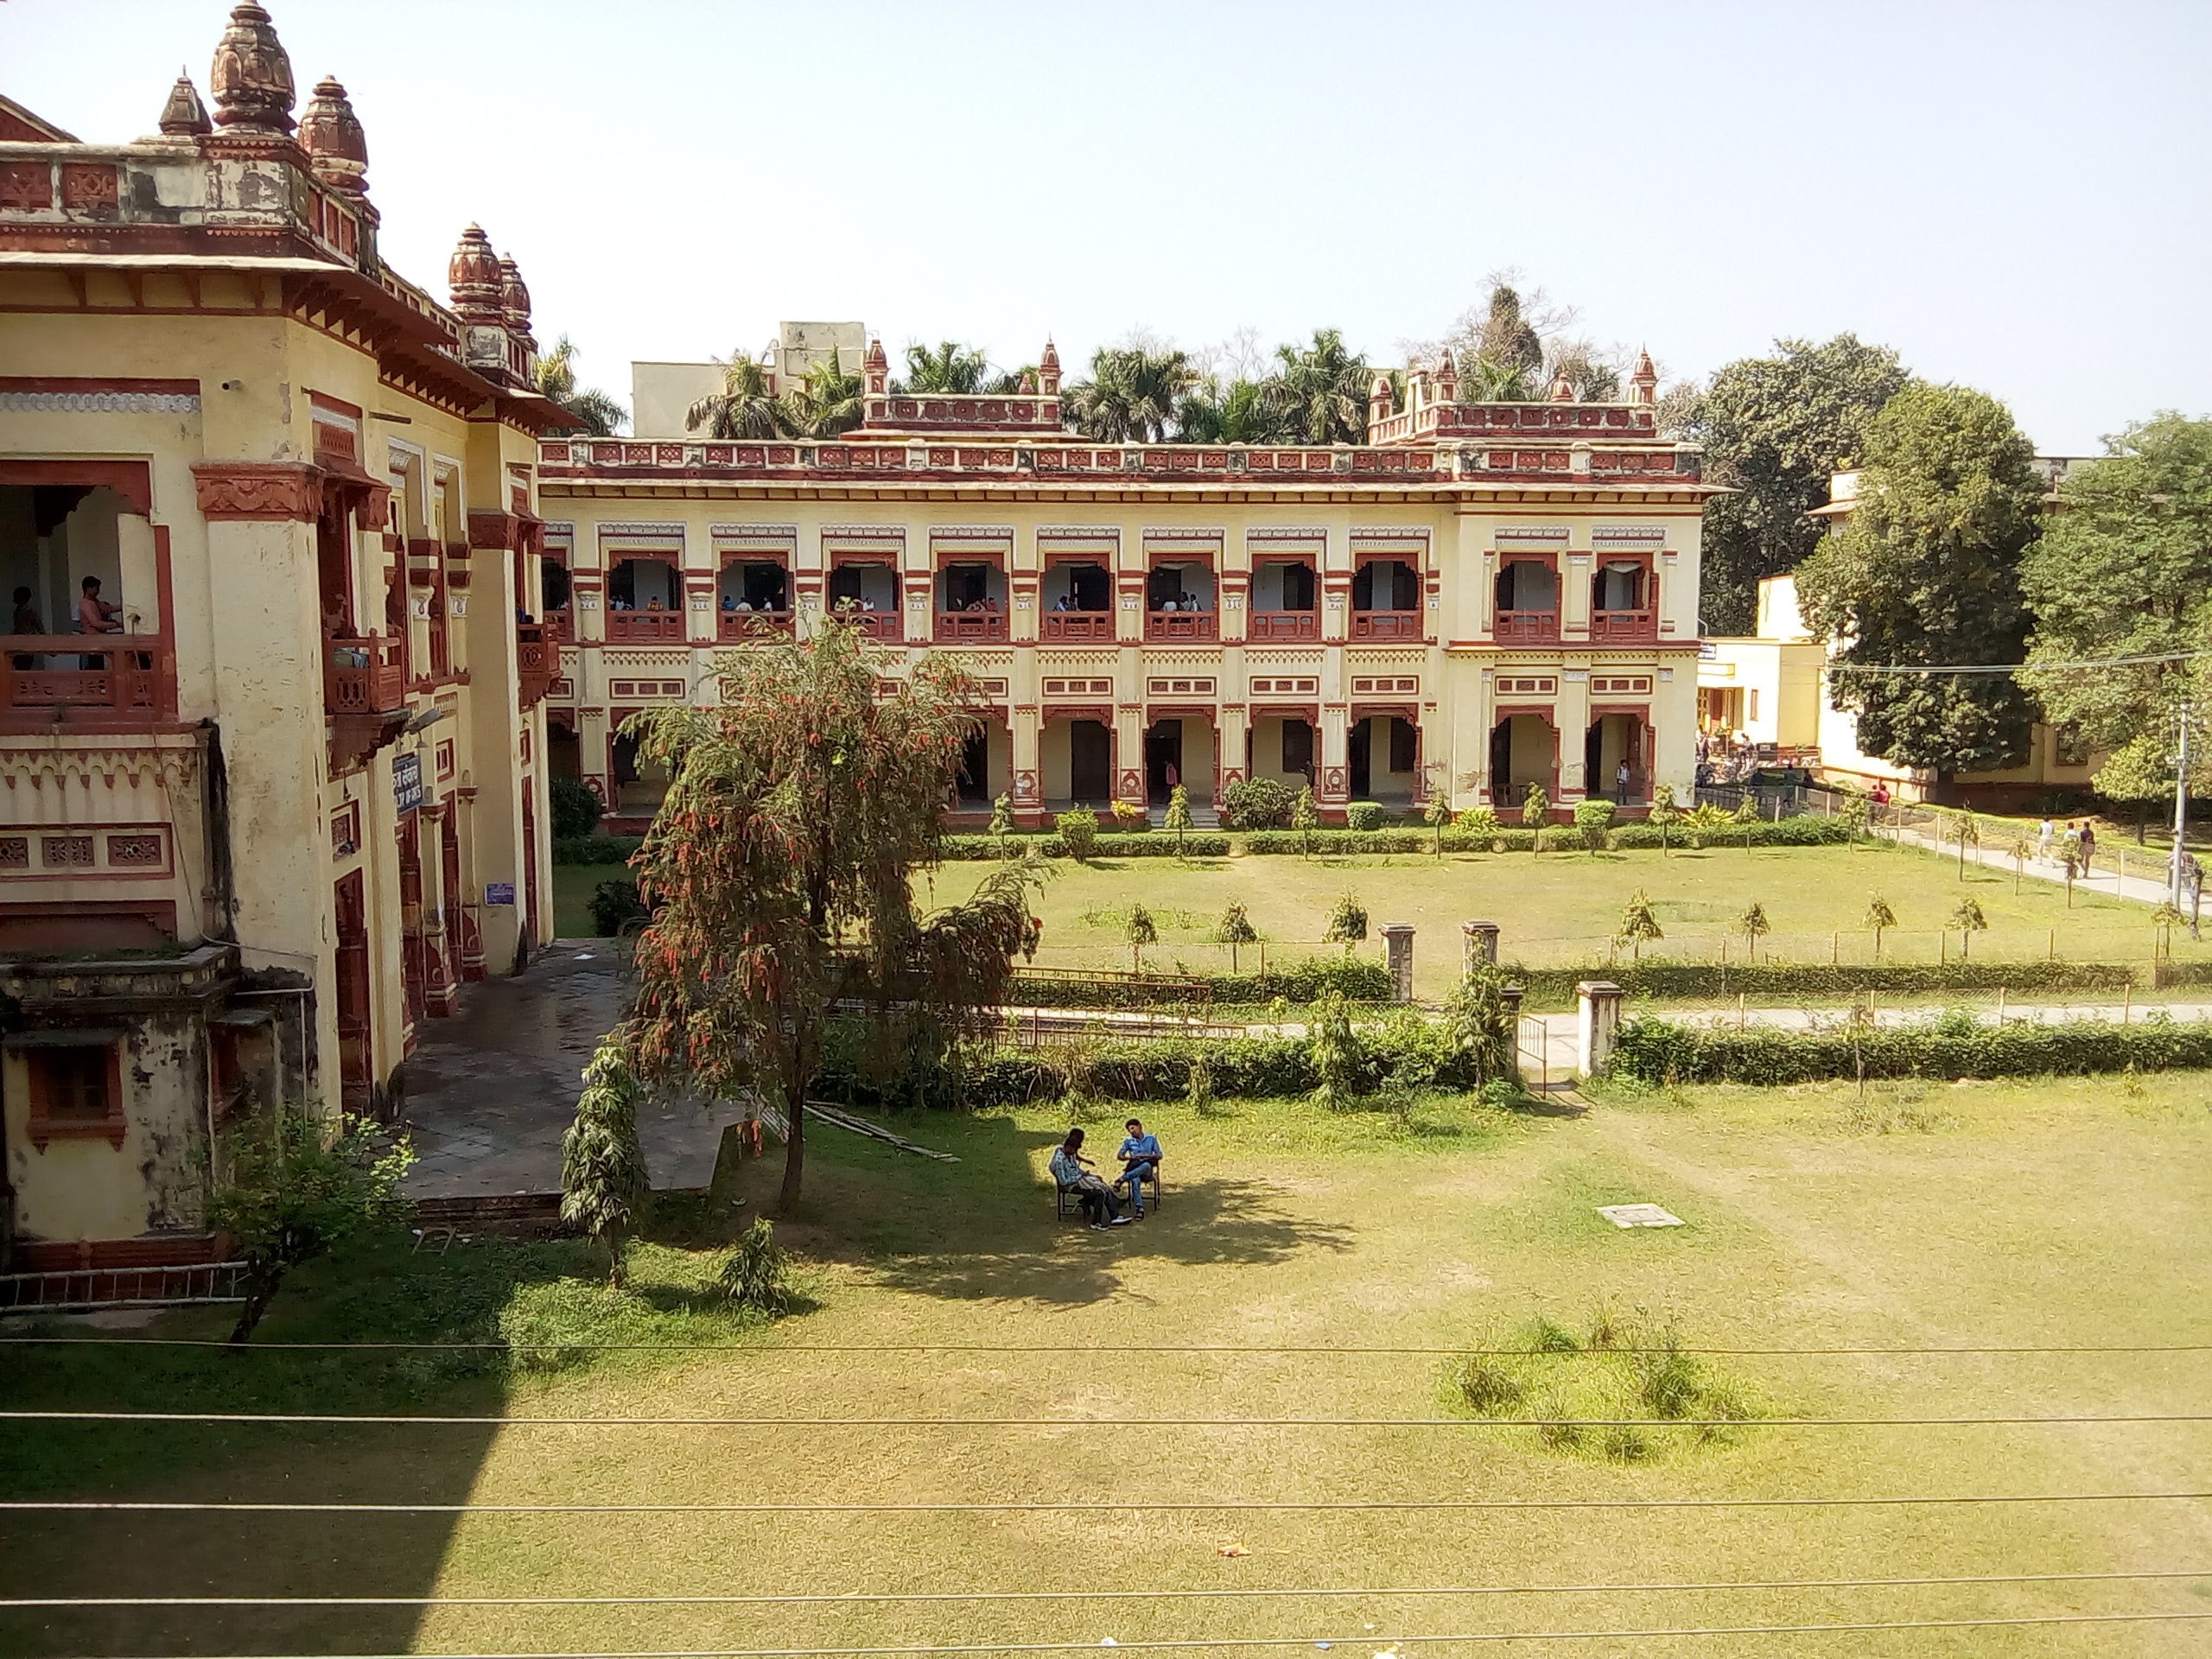 Two groups of BHU students clash on campus; petrol bombs, stones hurled